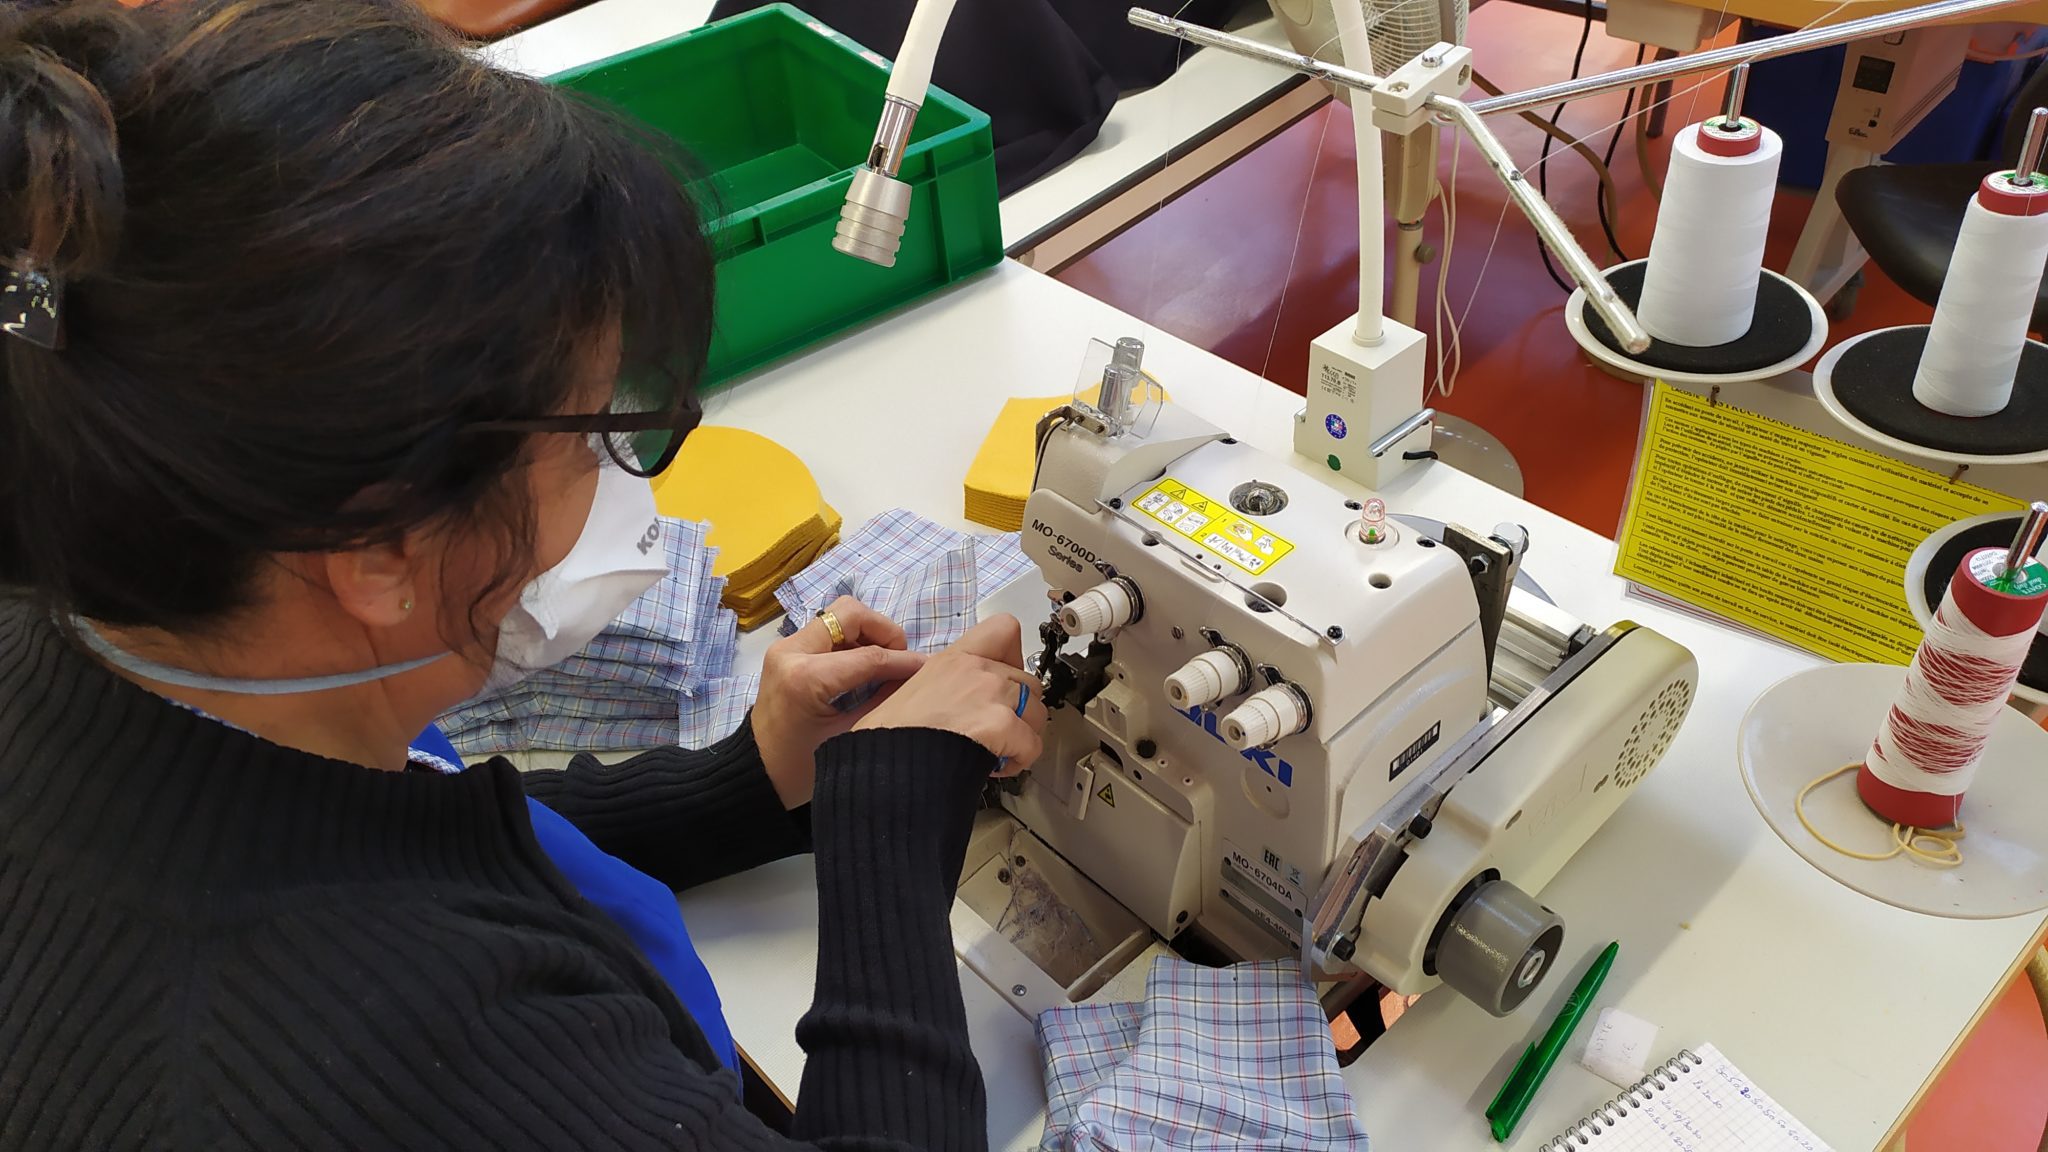 Historic Lacoste in produces masks for workers |ADDICTED